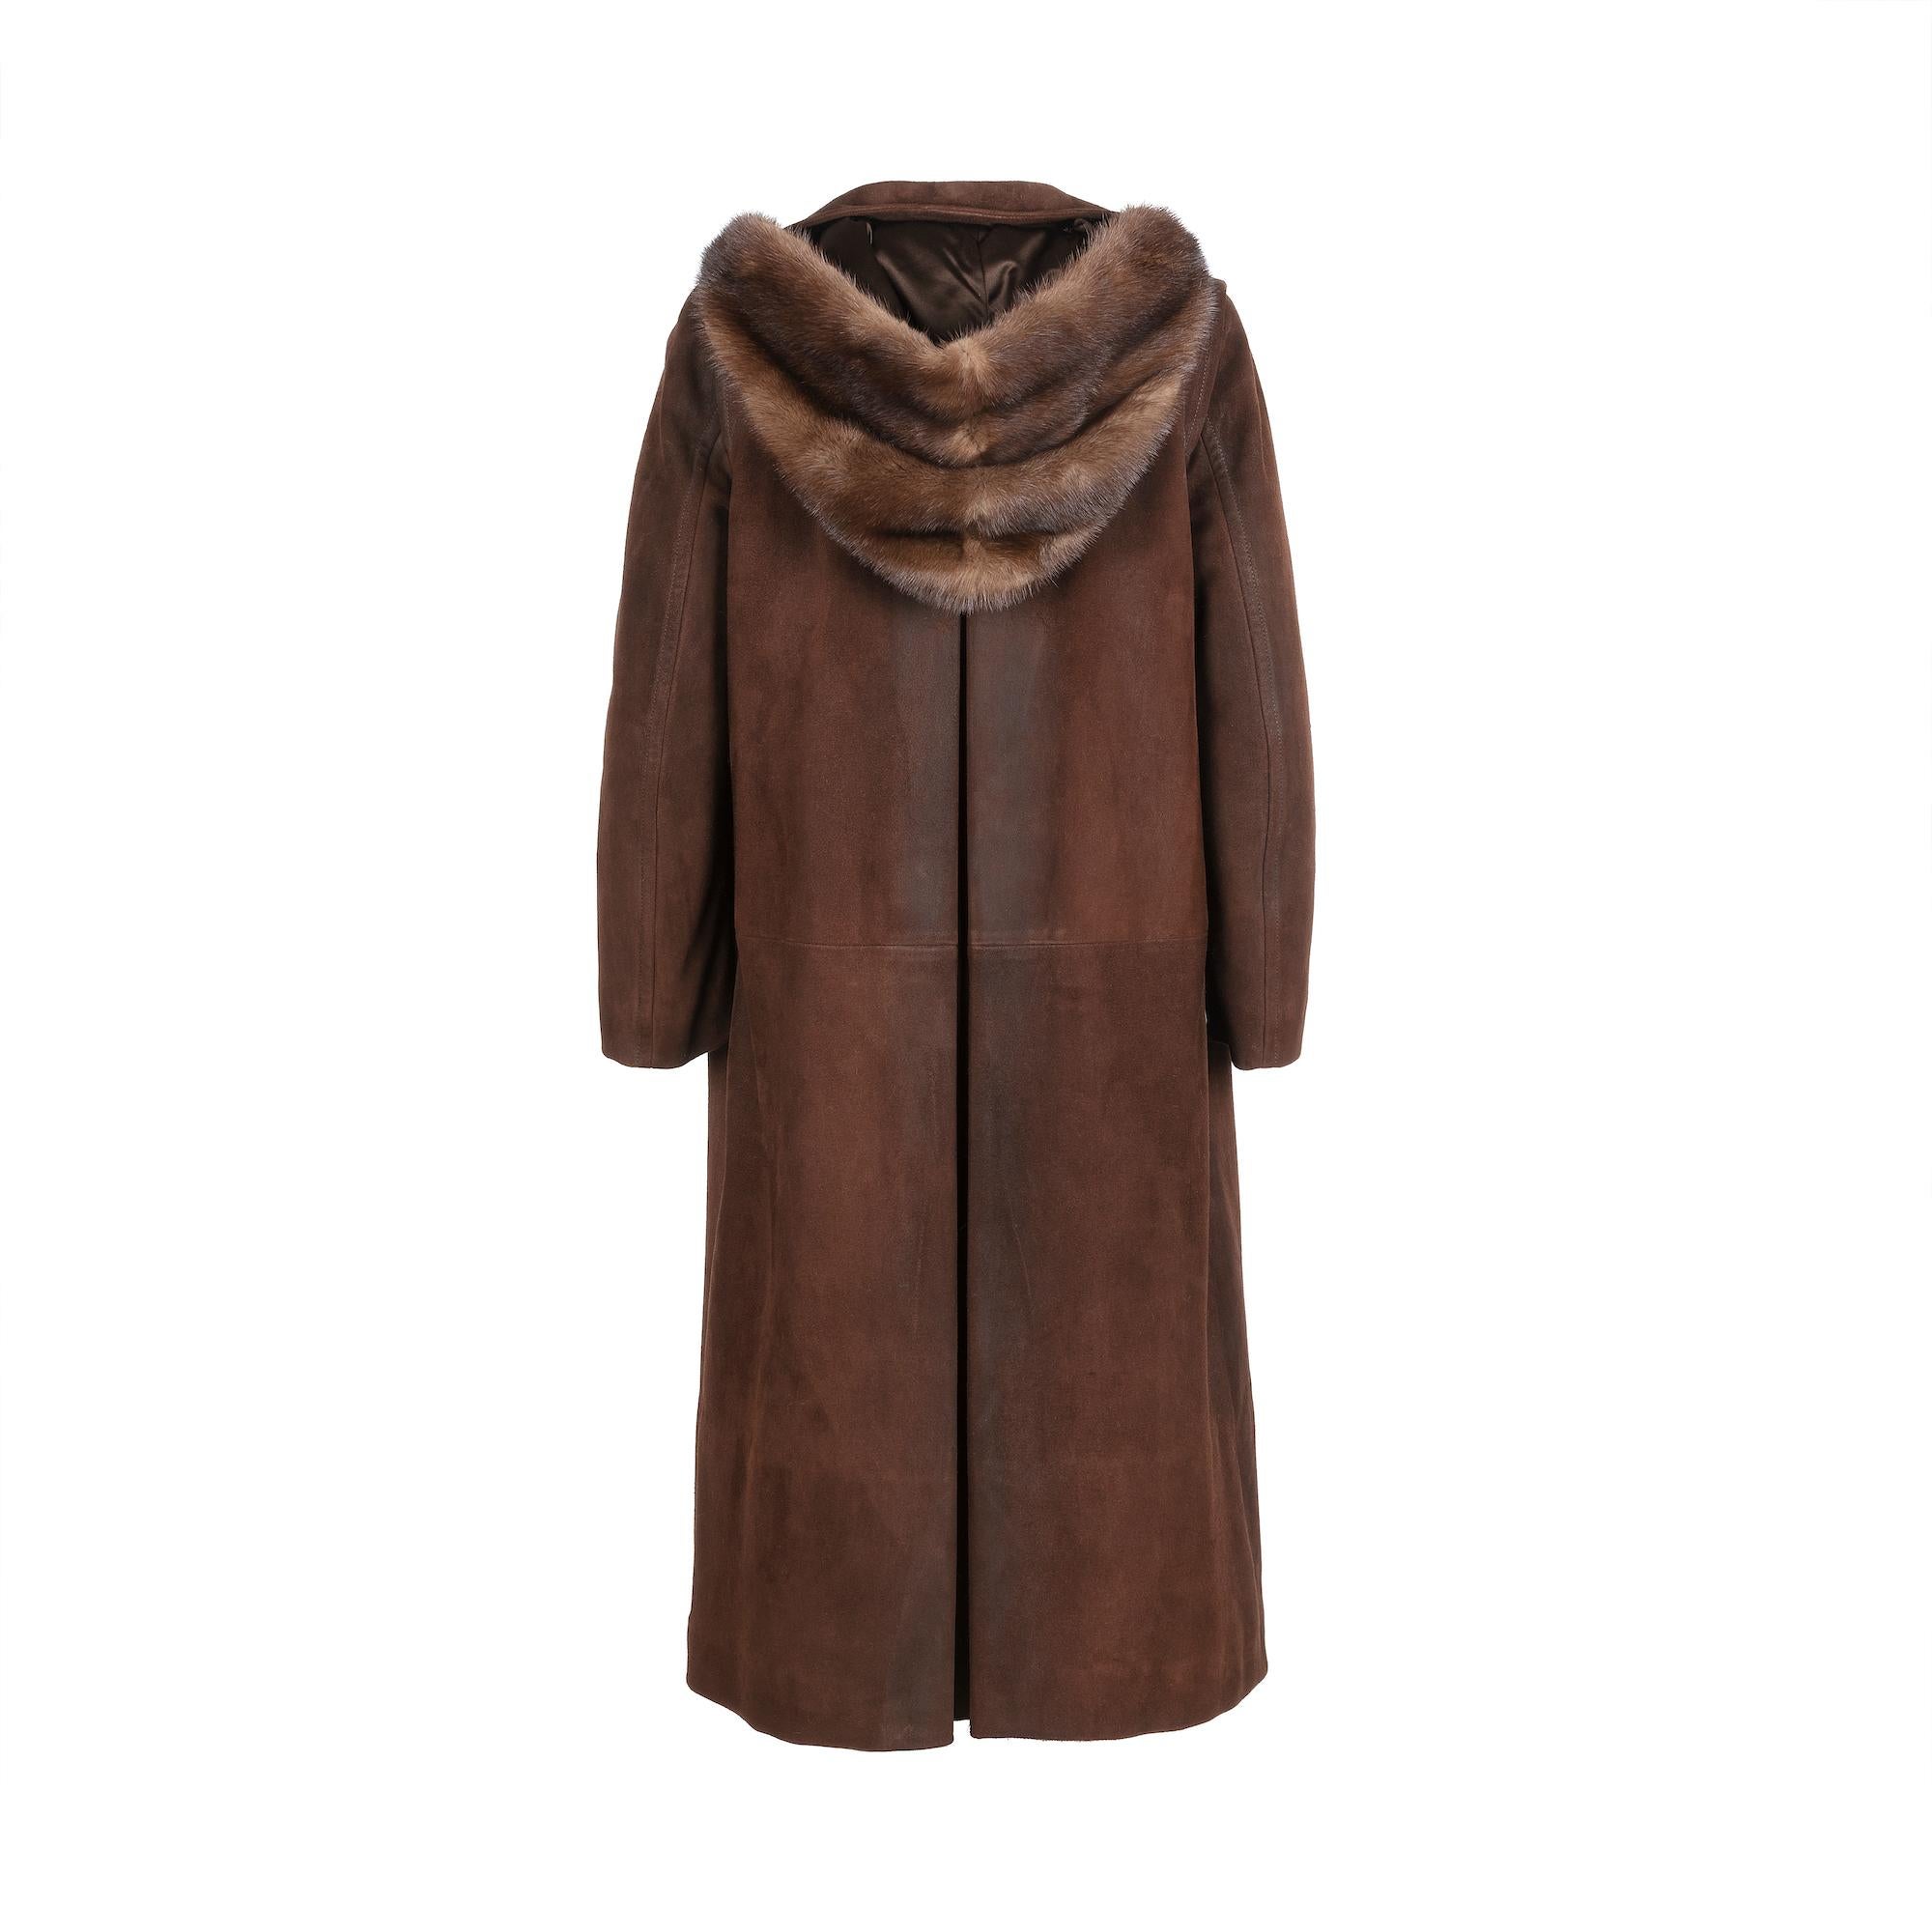 Prada Suede Fur Hooded Coat In Excellent Condition For Sale In London, GB